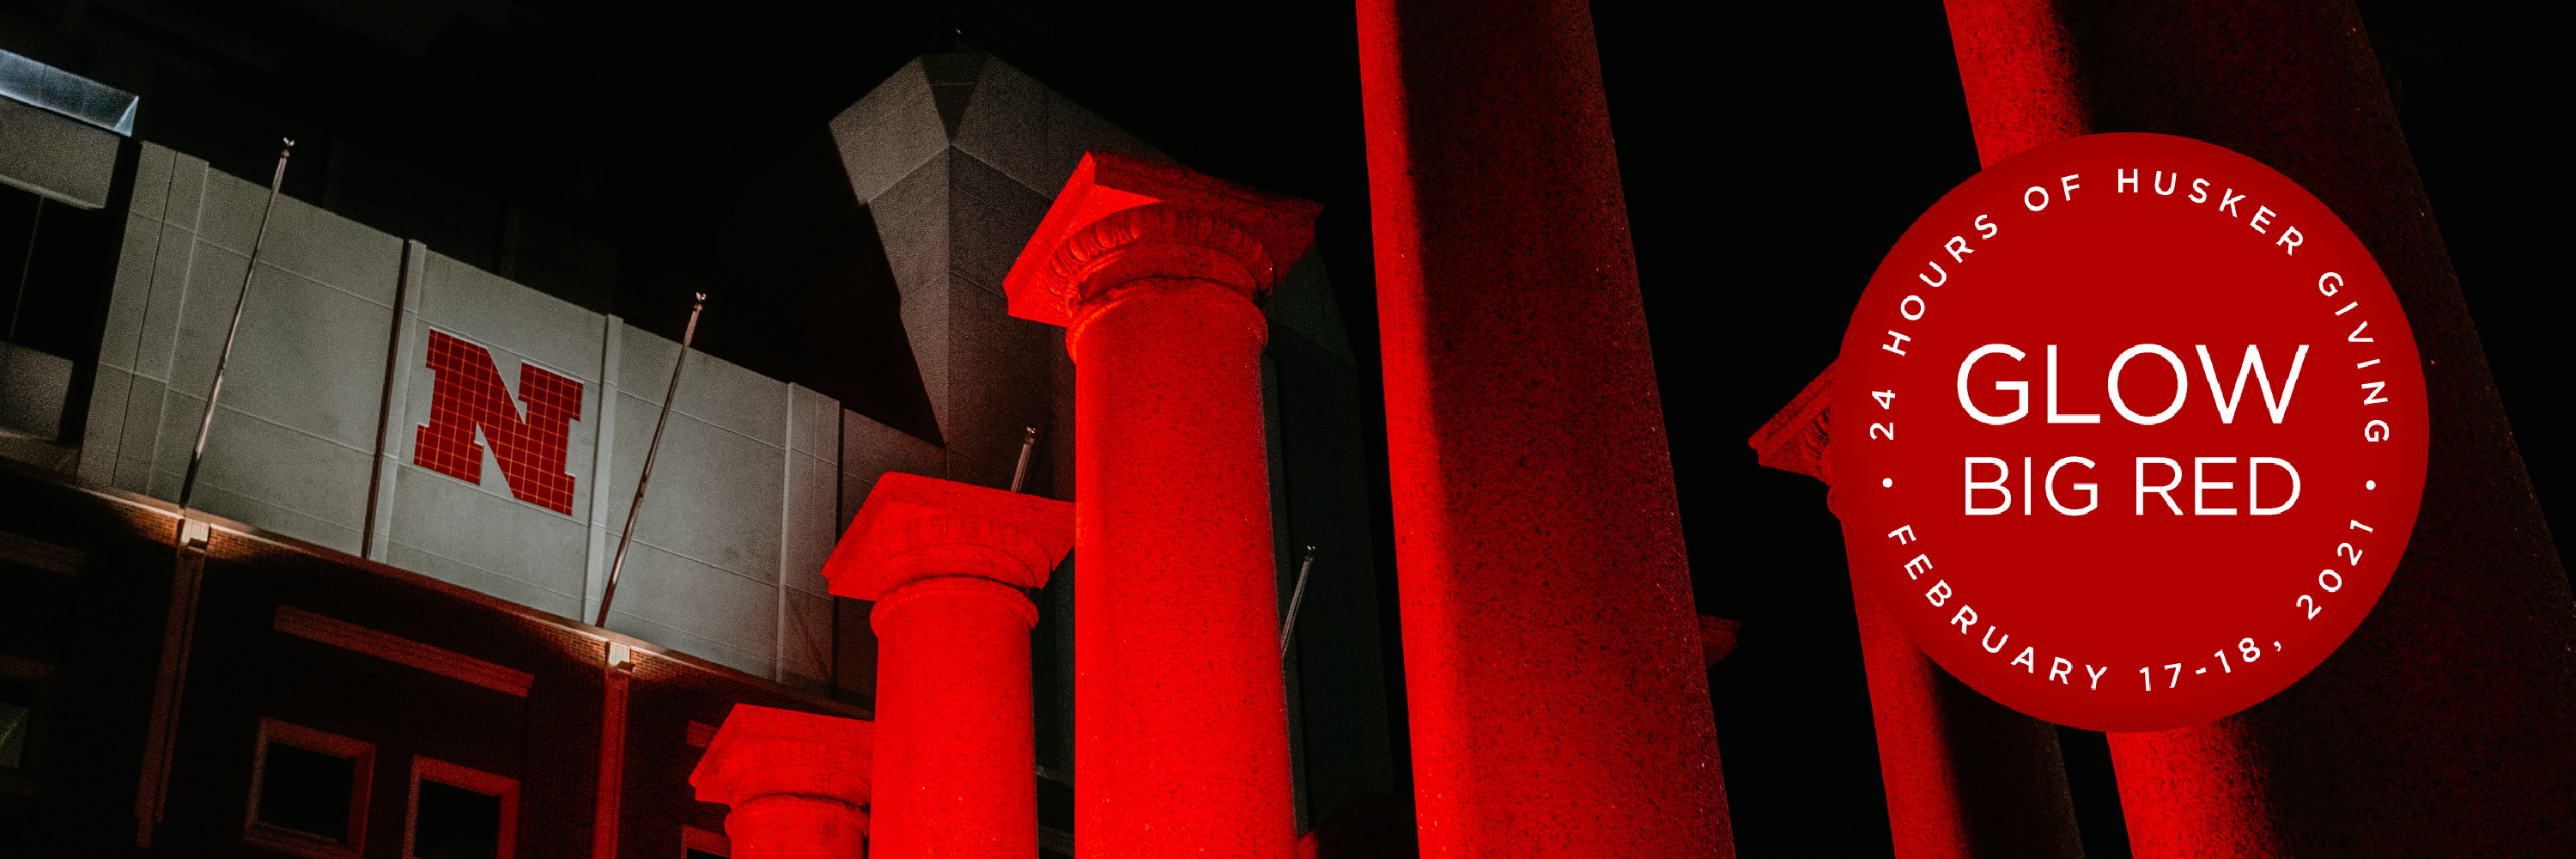 Glow Big Red—24 Hours of Husker Giving—begins at noon on Feb. 17. Visit http://glowbigred.unl.edu to help support the Hixson-Lied College of Fine and Performing Arts.